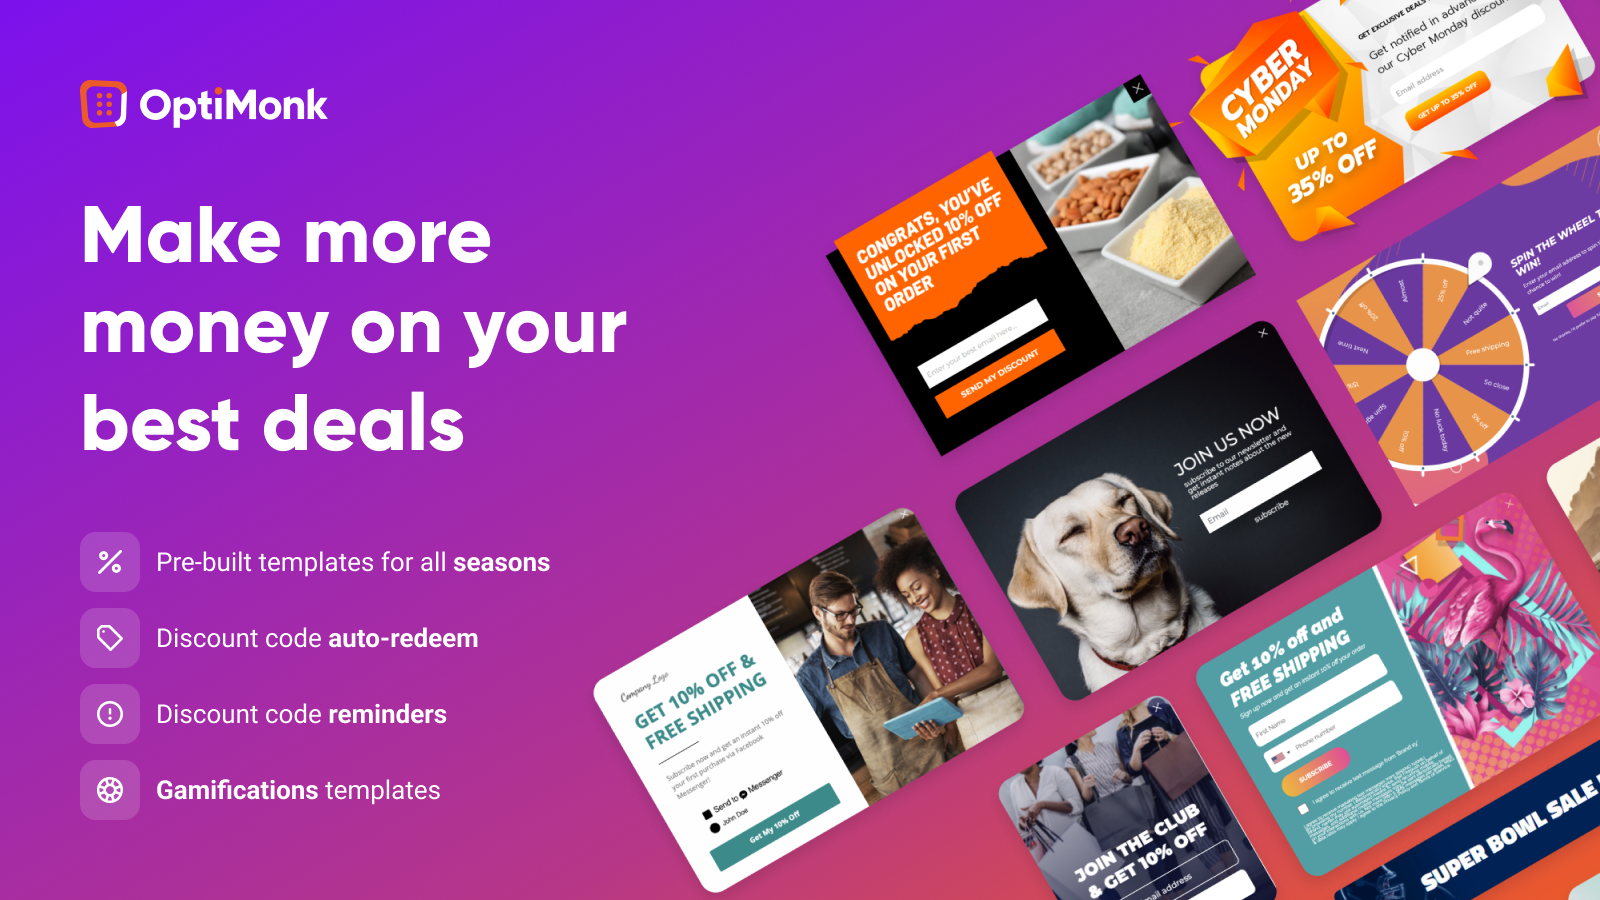 Get the most out of your seasonal offers, boost conversion rates with unique discount codes, auto-redeem, gamification templates and more.